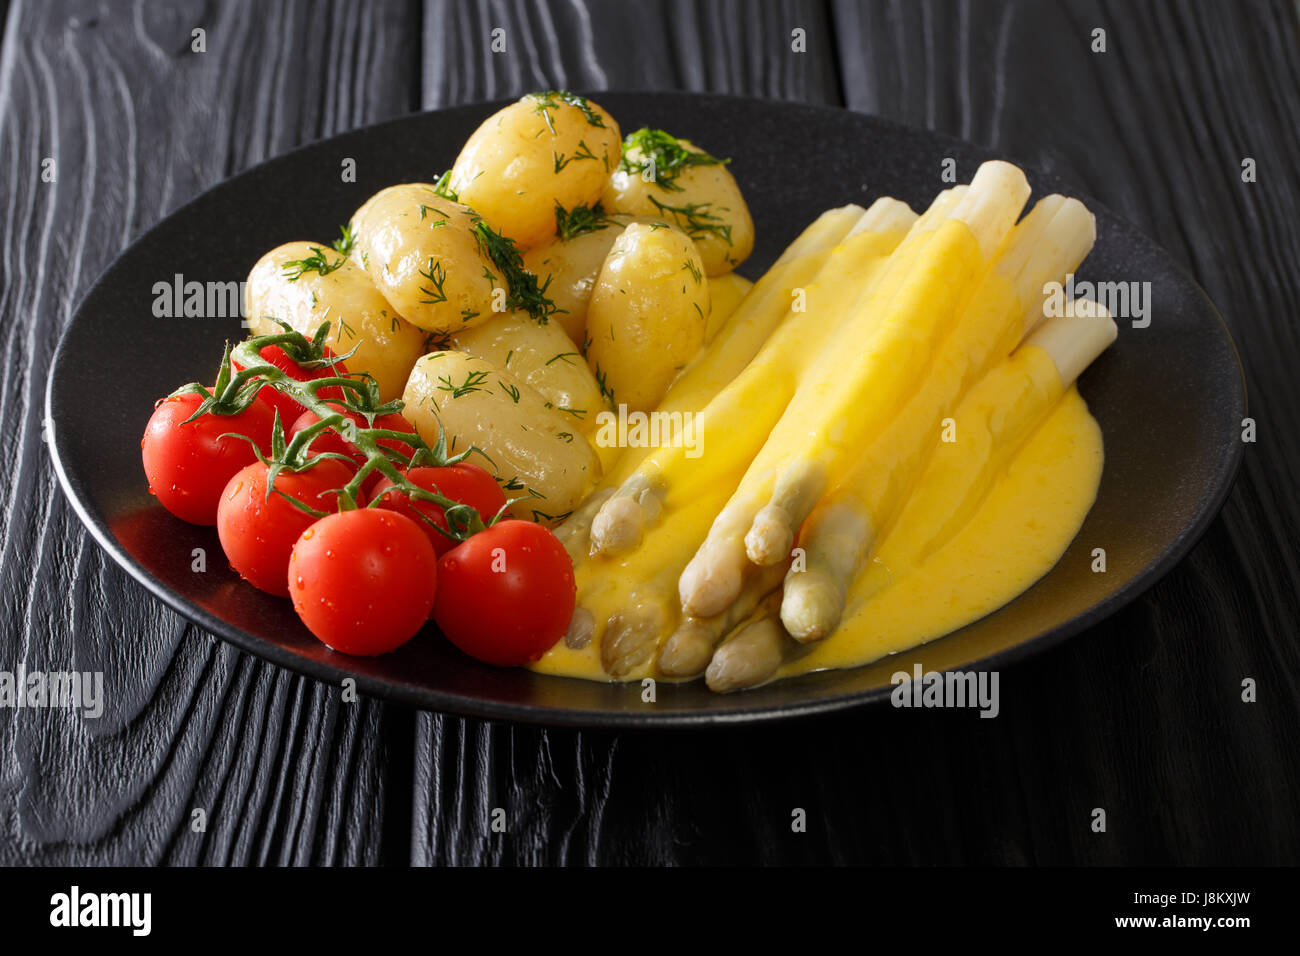 white asparagus with hollandaise sauce, new potatoes and tomatoes close ...